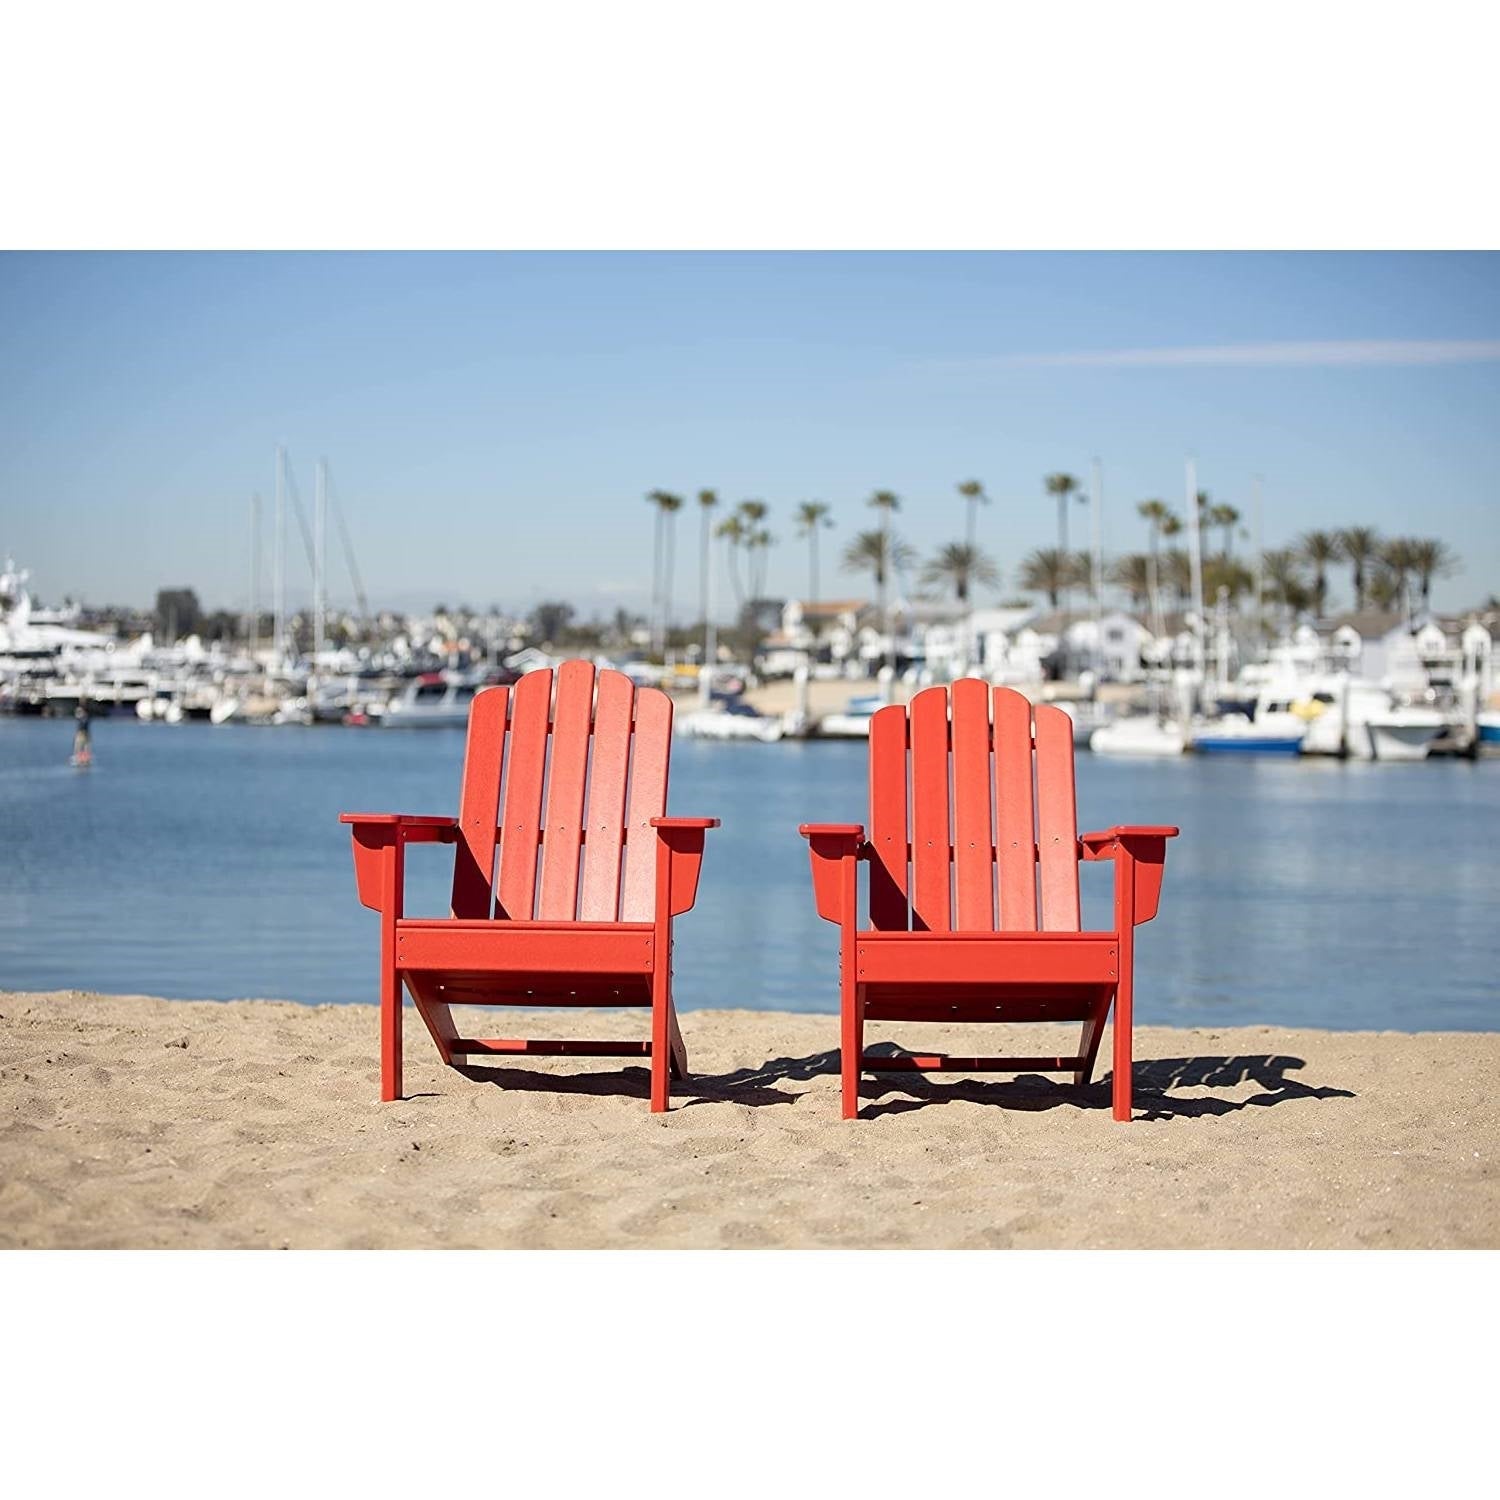 Outdoor > Outdoor Furniture > Adirondack Chairs - All Weather Recycled Red Poly Plastic Outdoor Patio Adirondack Chairs - Set Of 2